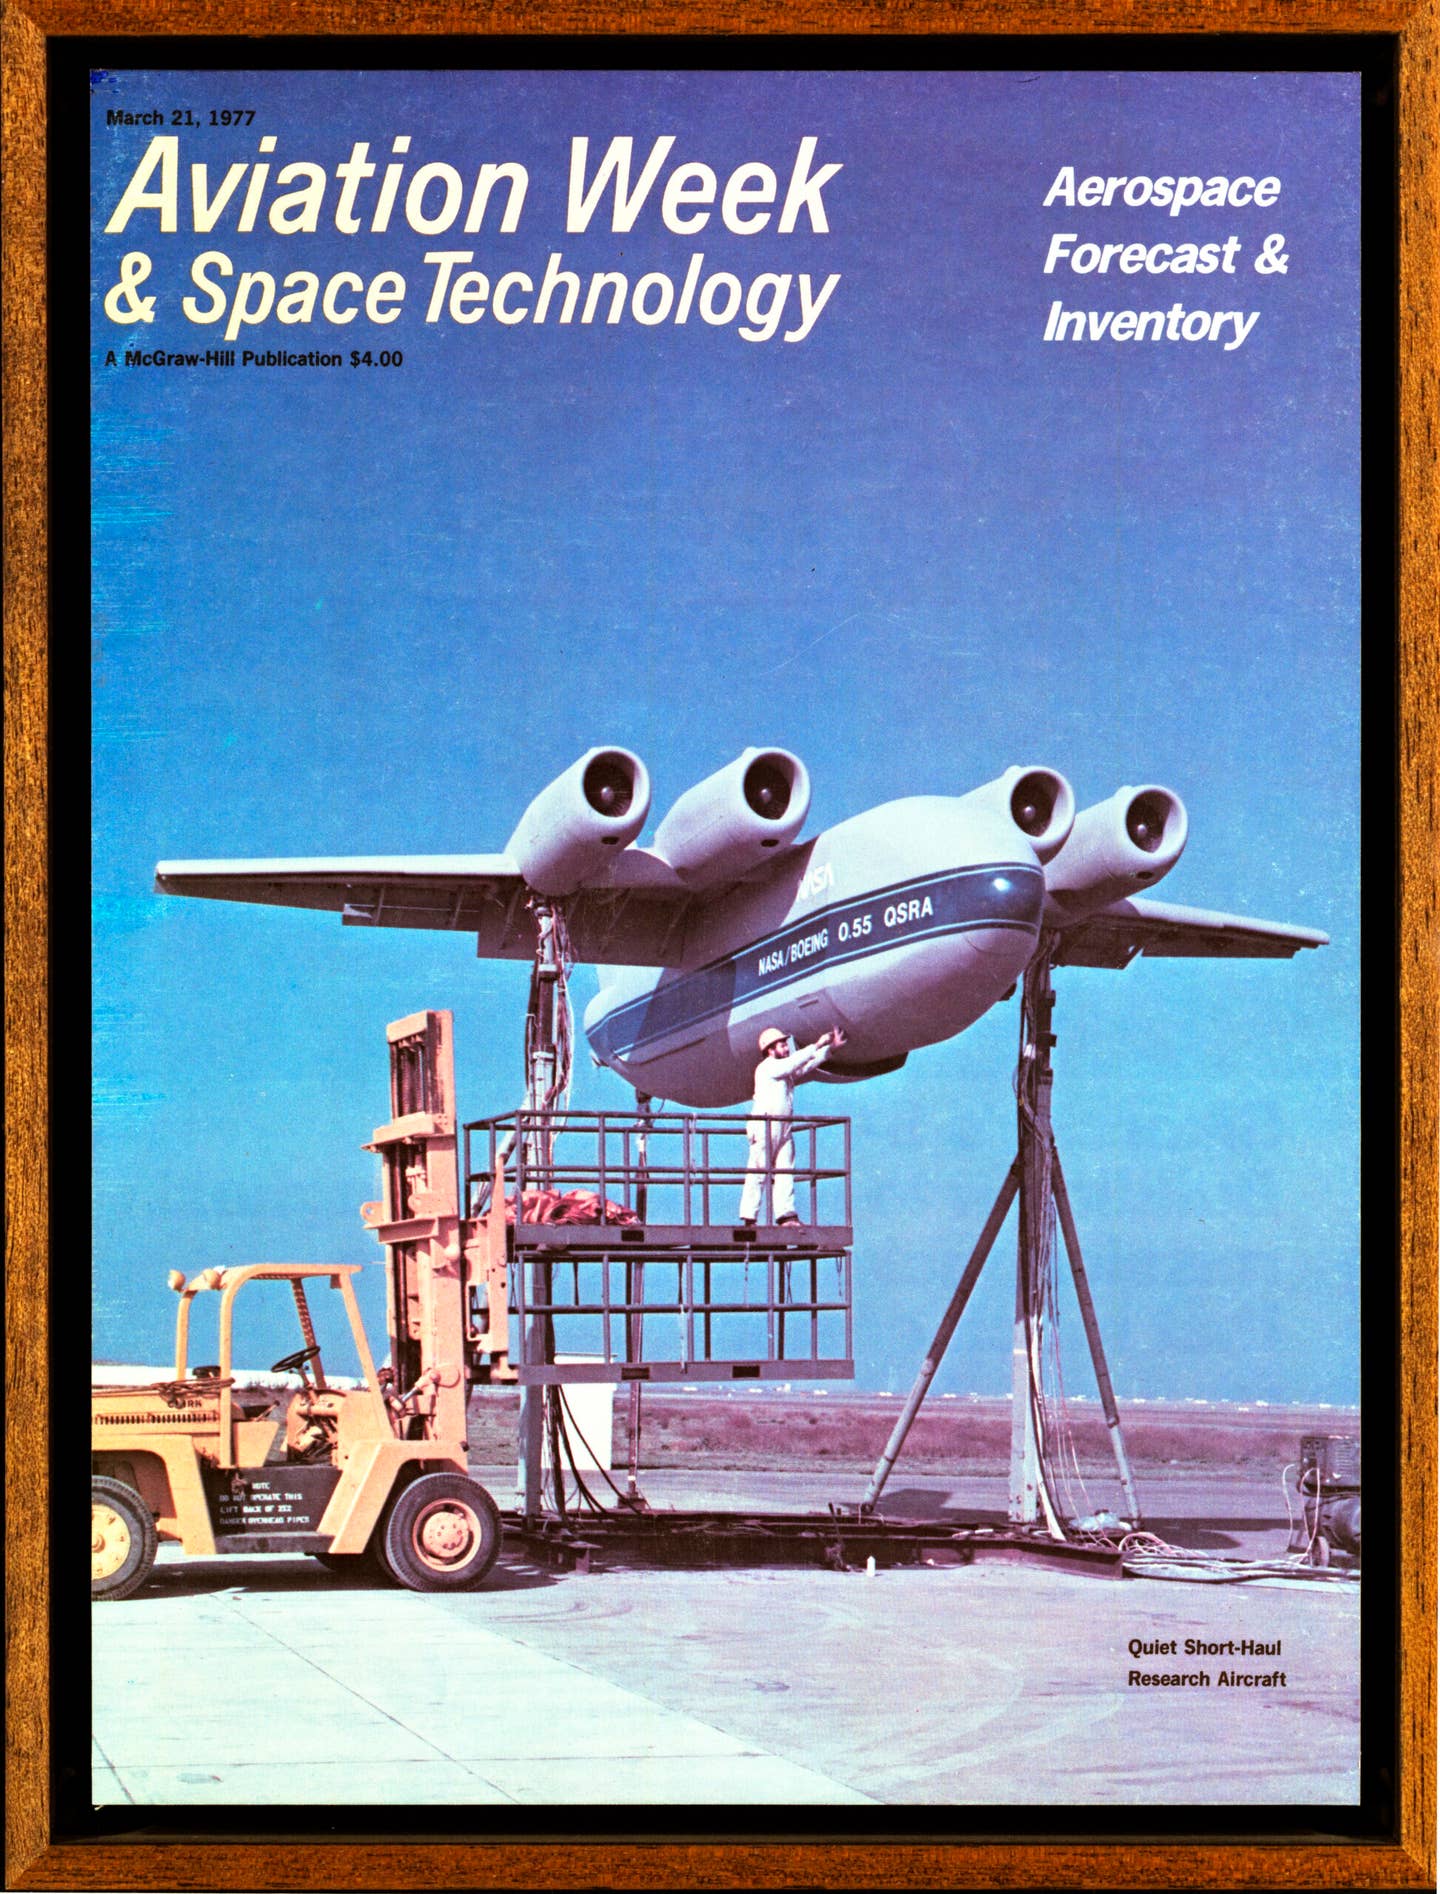 A static test rig for the QSRA that appeared on the cover of the <em>Aviation Week &amp; Space Technology</em> on March 21, 1977.